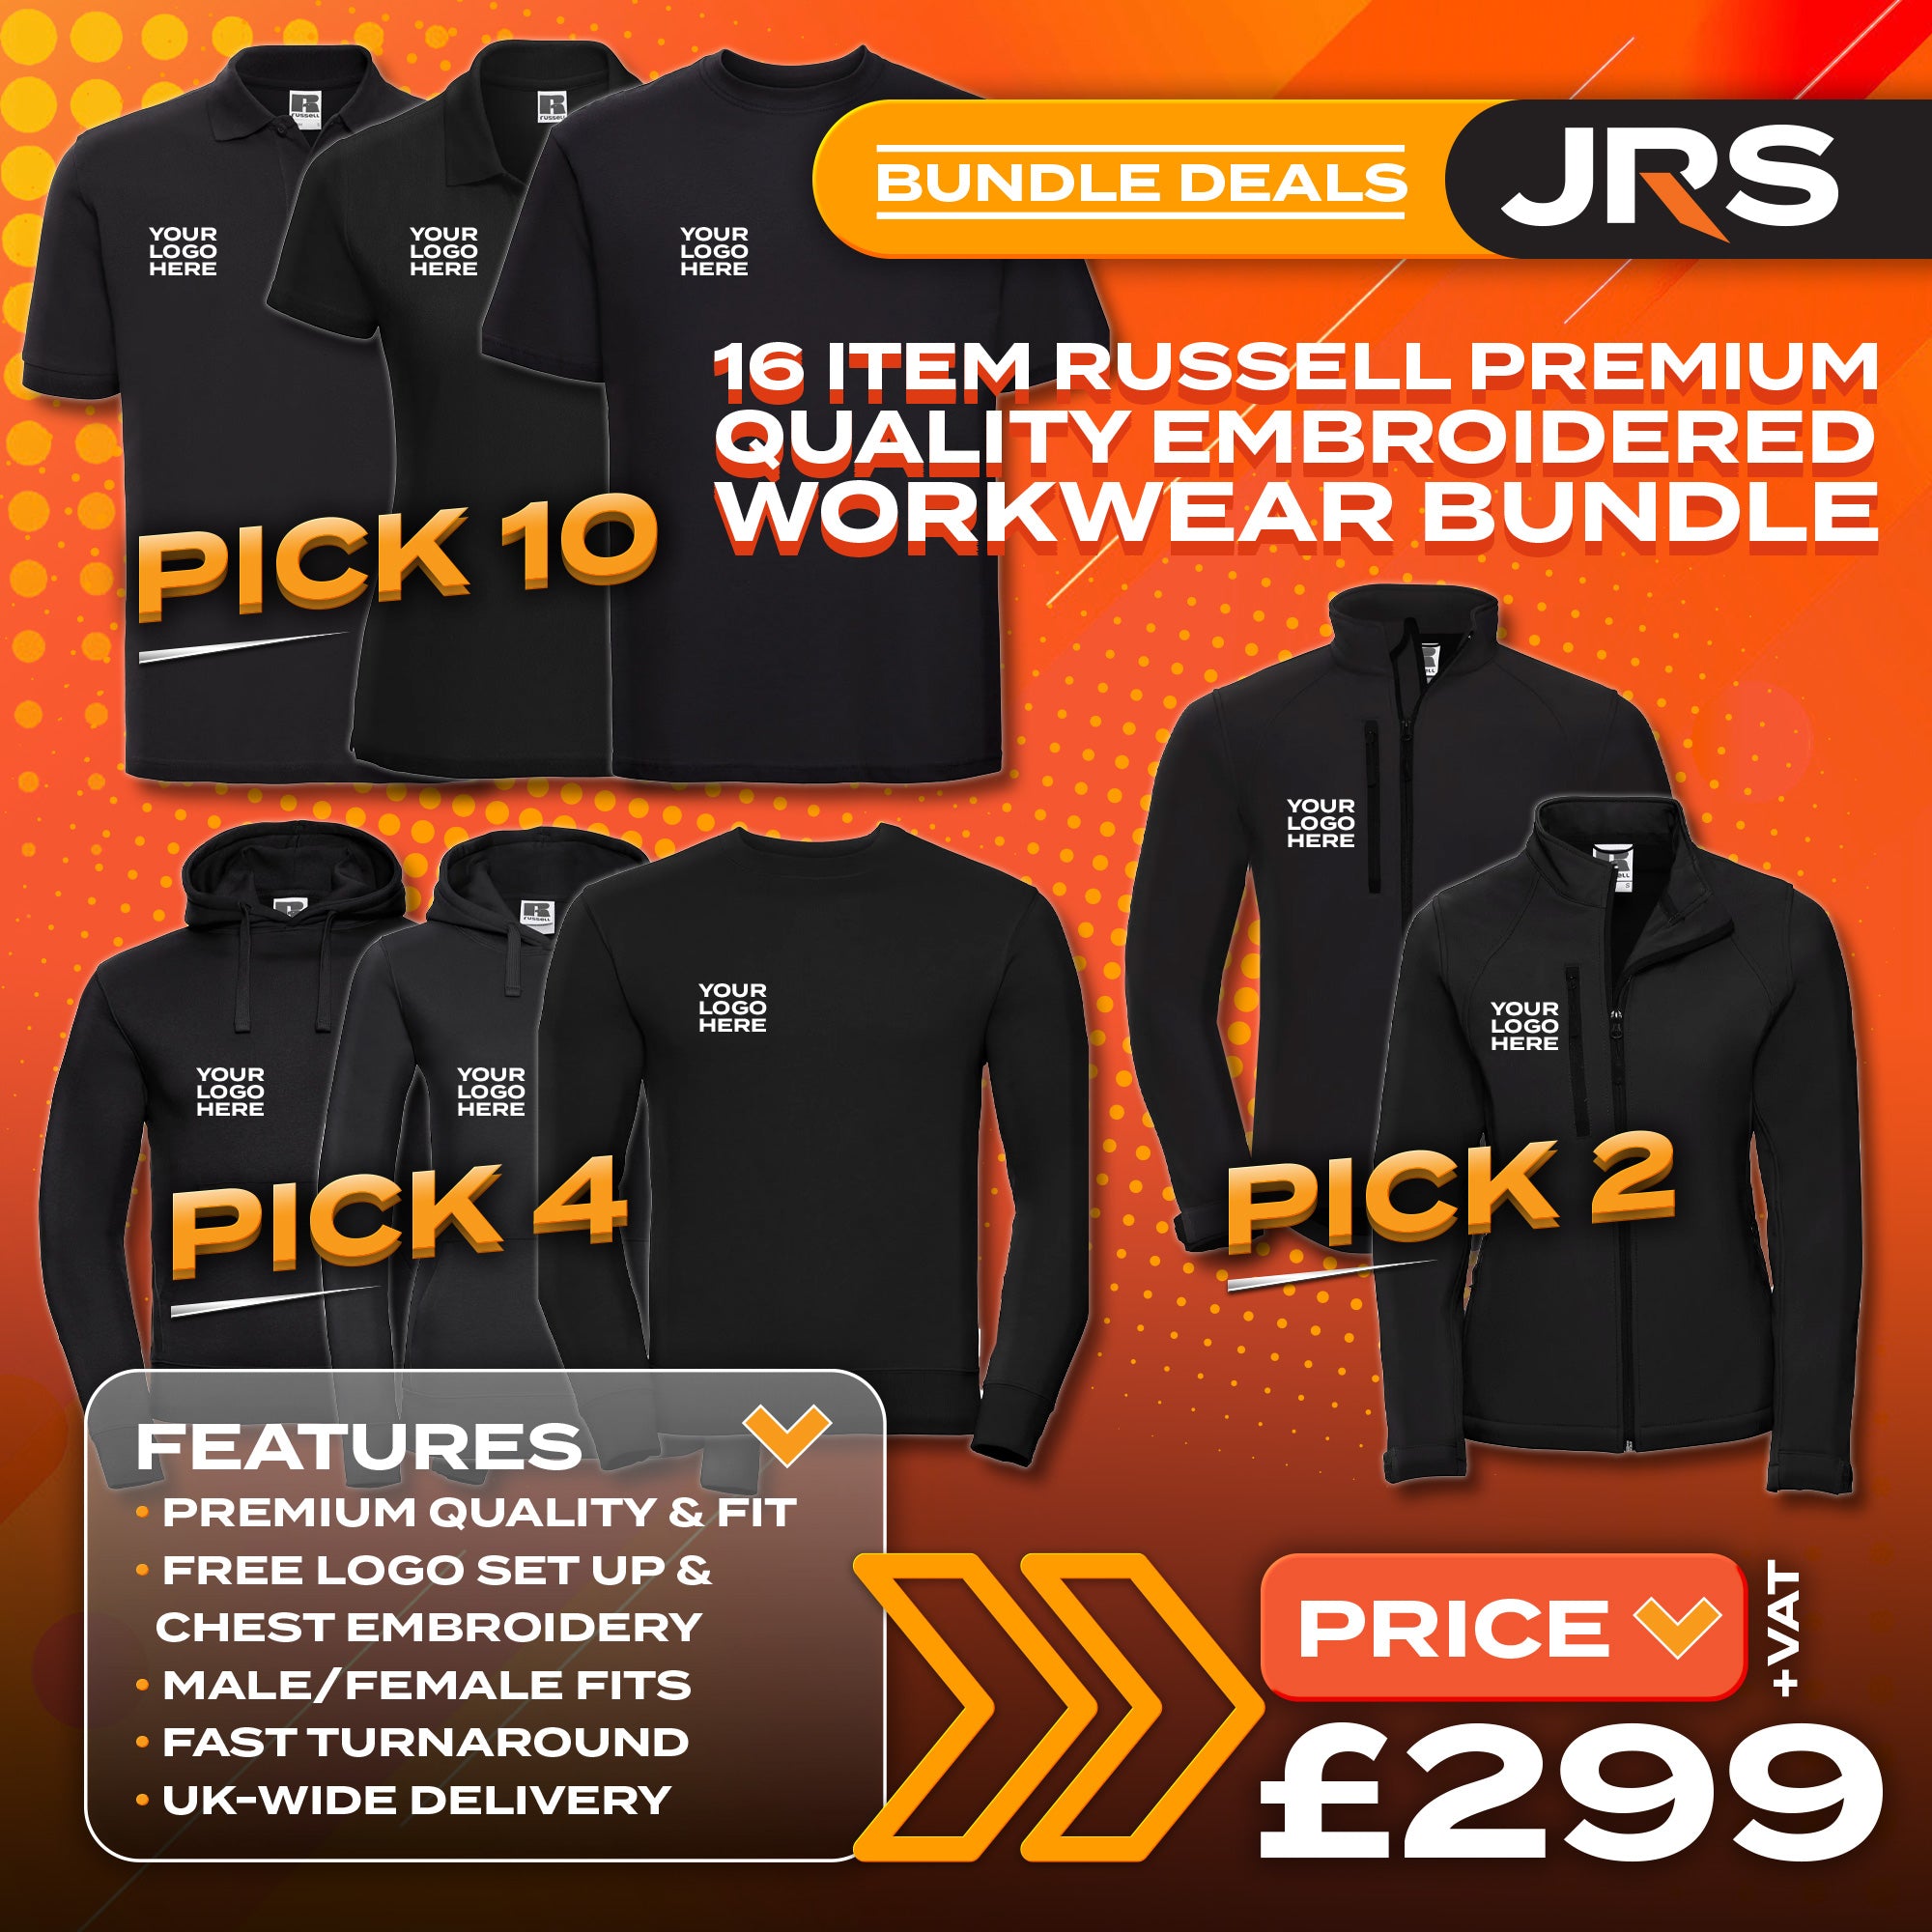 16 Item Russell Premium Quality Embroidered Workwear Bundle with Free Logo